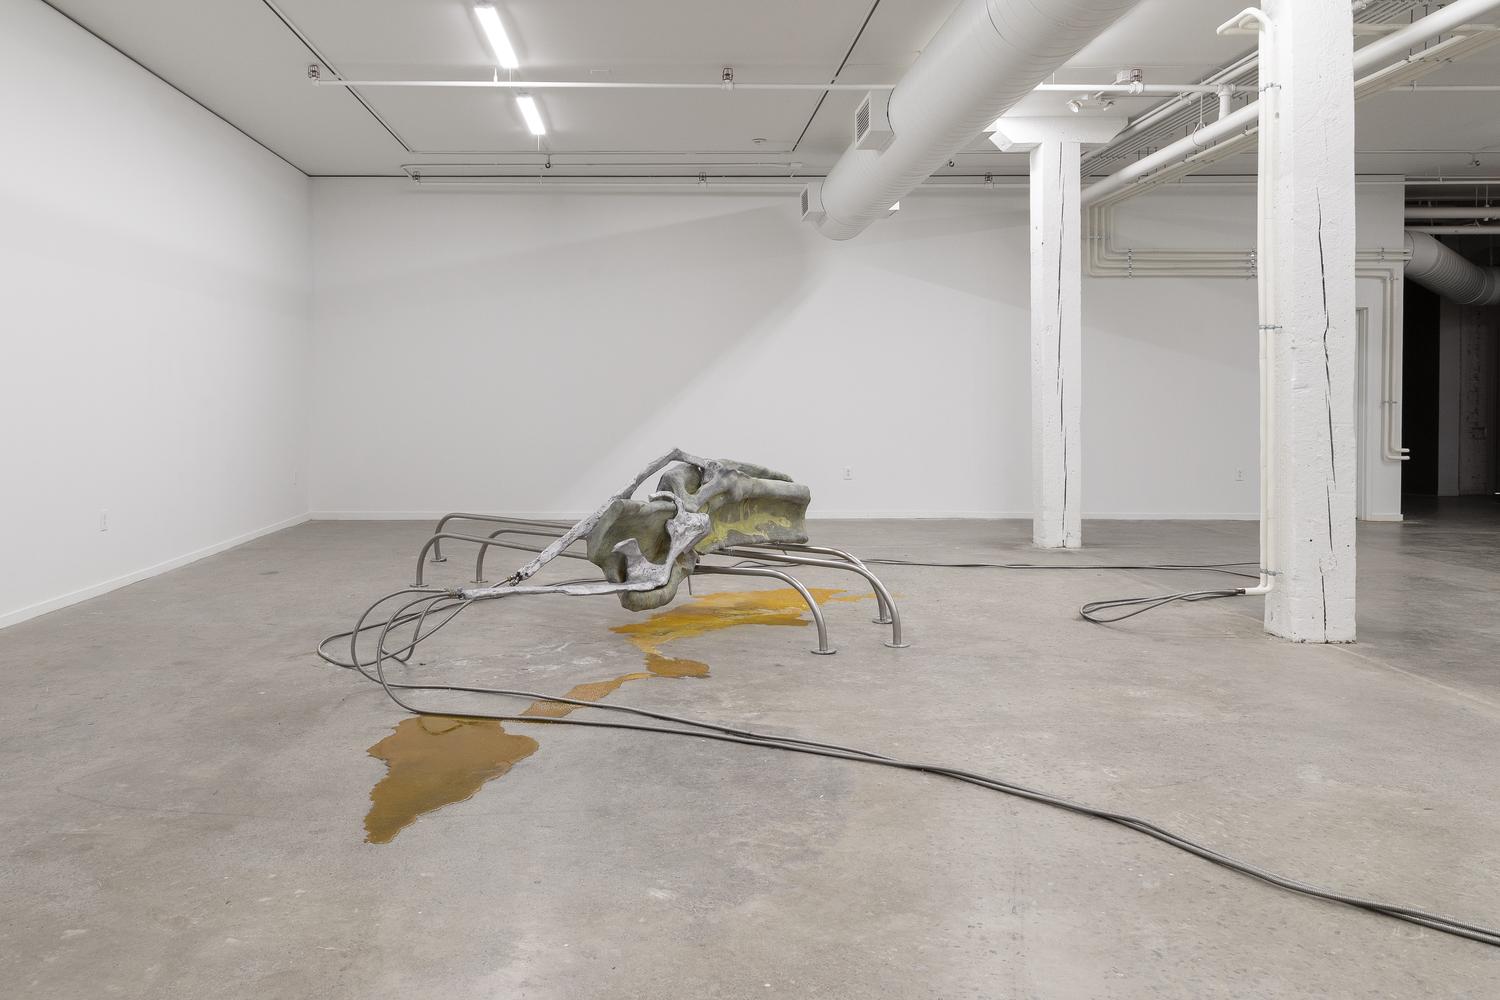 An art gallery with white walls and concrete floors, which is empty save for an abstract metal sculpture that resembles something between a spider and a pile of dinosaur bones. It seems to be leaking a dark orange hued fluid, like car engine oil.